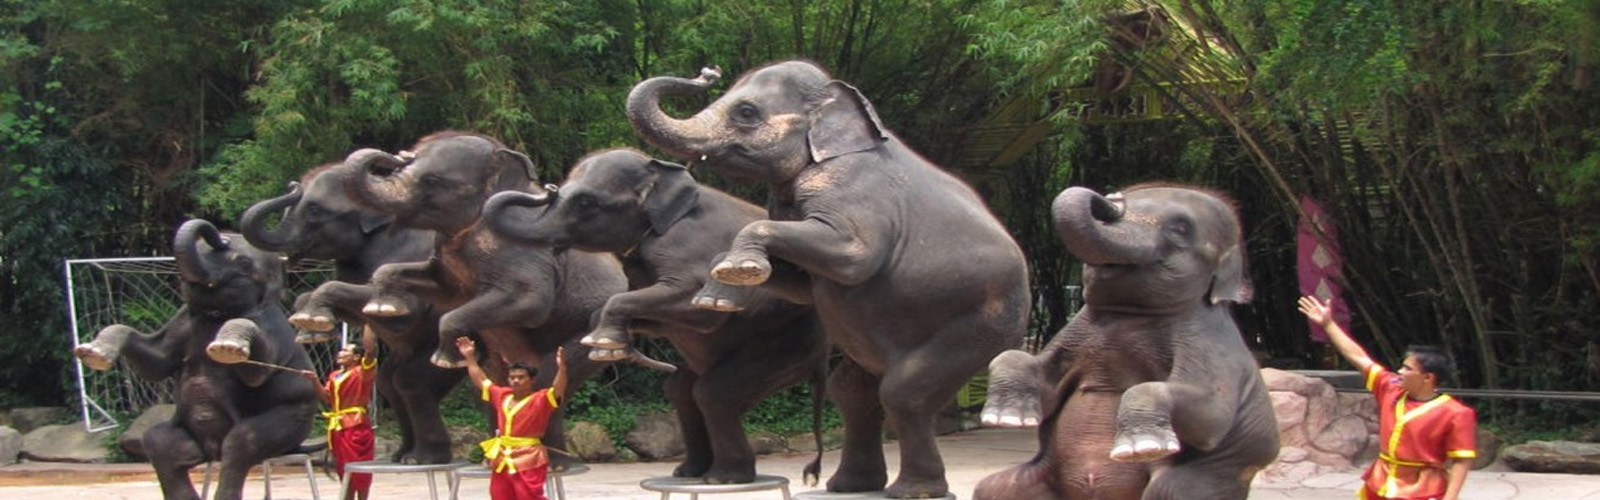 Asia tourism industry keeps elephants in cruel conditions, rights body says